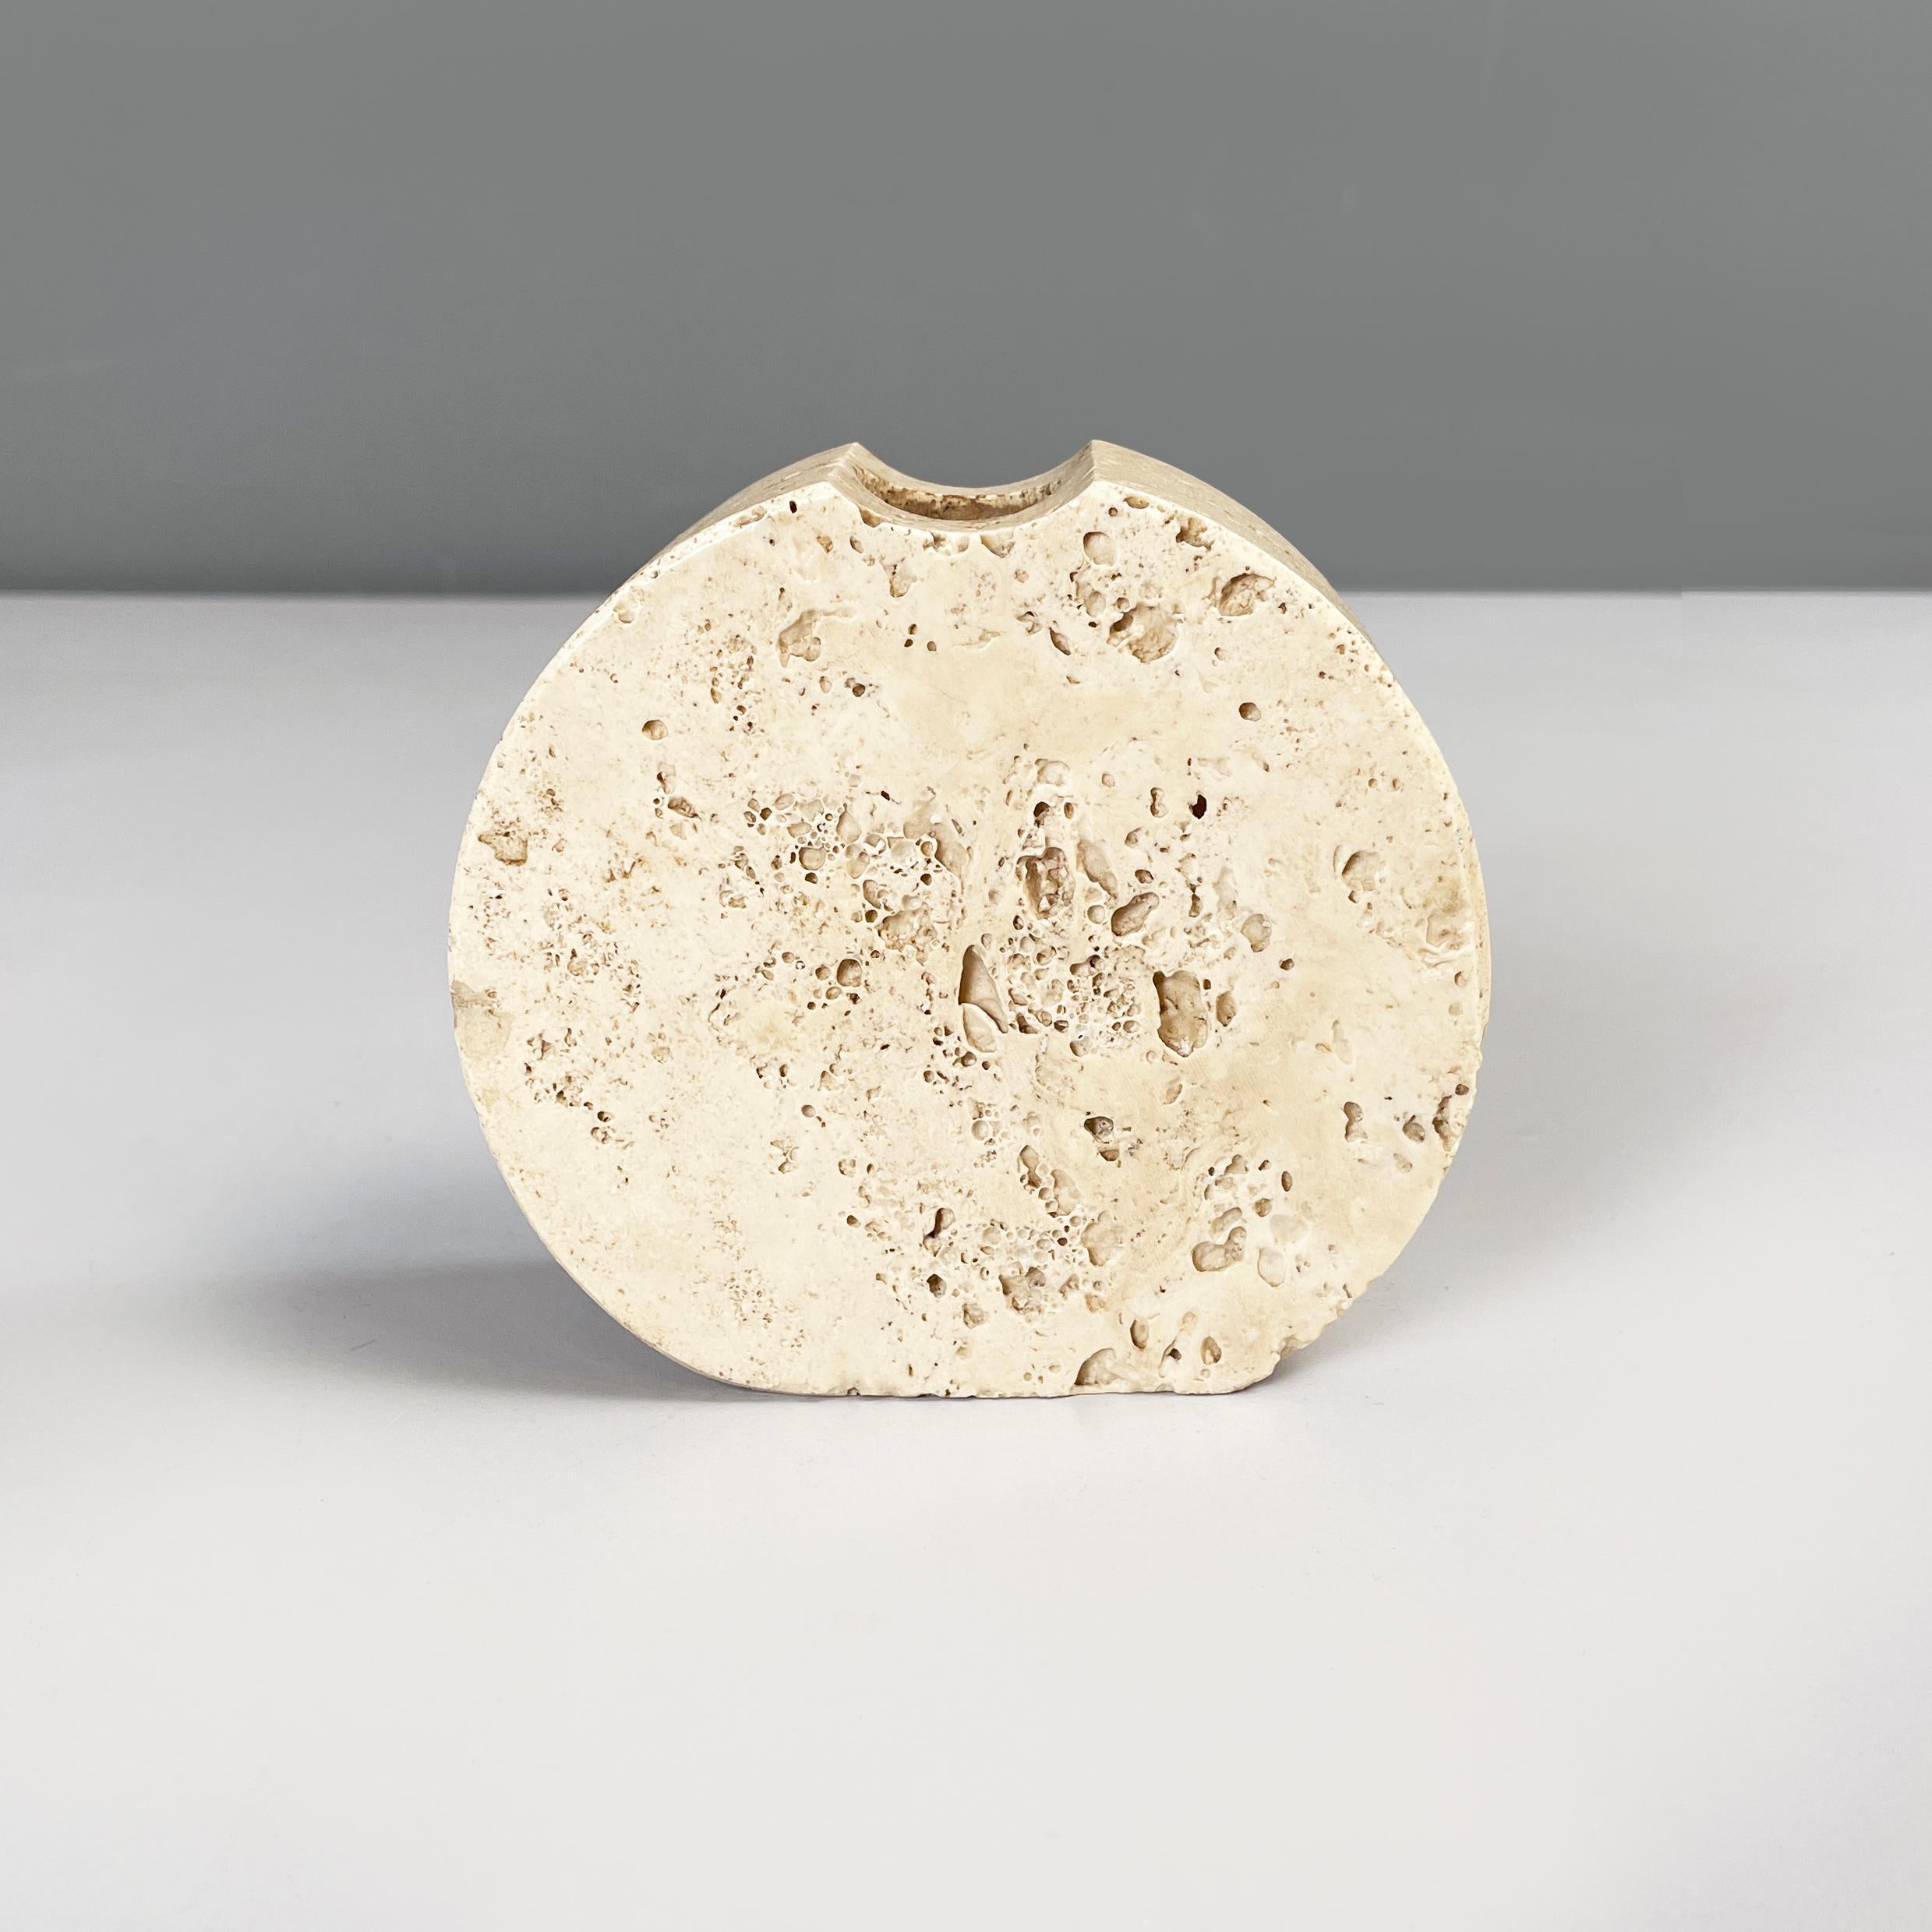 Italian modern round decorative vase or holder in travertine, 1970s
Single flower vase entirely in travertine. The rounded structure at the top presents a round hole. This decorative object can be used in different ways: for example as a candle